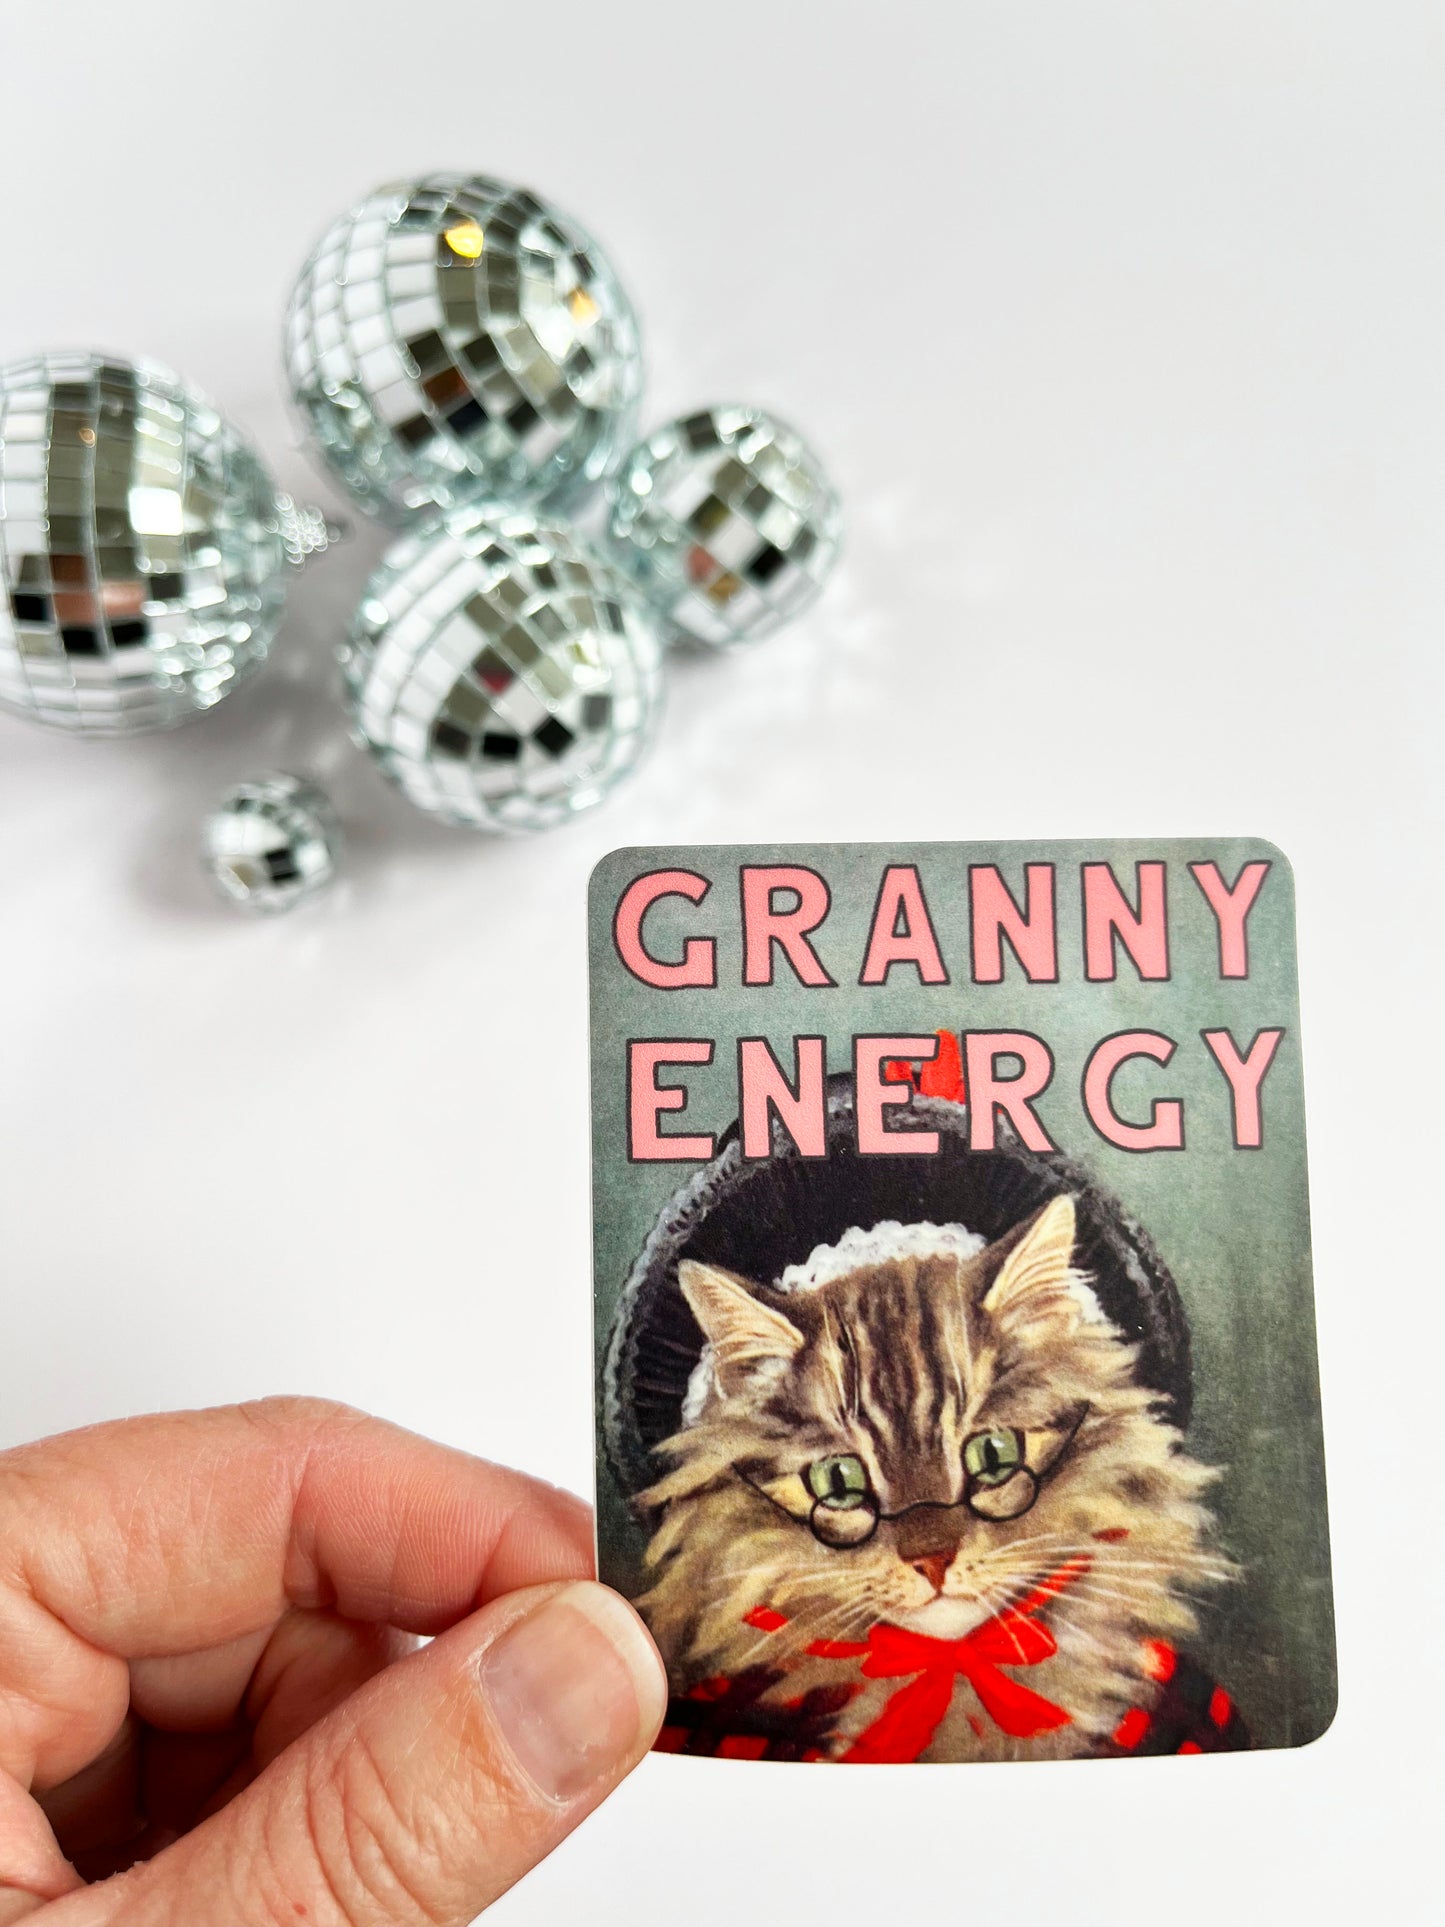 silly fun funny granny energy high quality vinyl sticker water bottle laptop car notebook journal coin laundry kitten cat kitty in vintage hat glasses grandmacore cottagecore farm garden sustainable living homemade crafts montana 